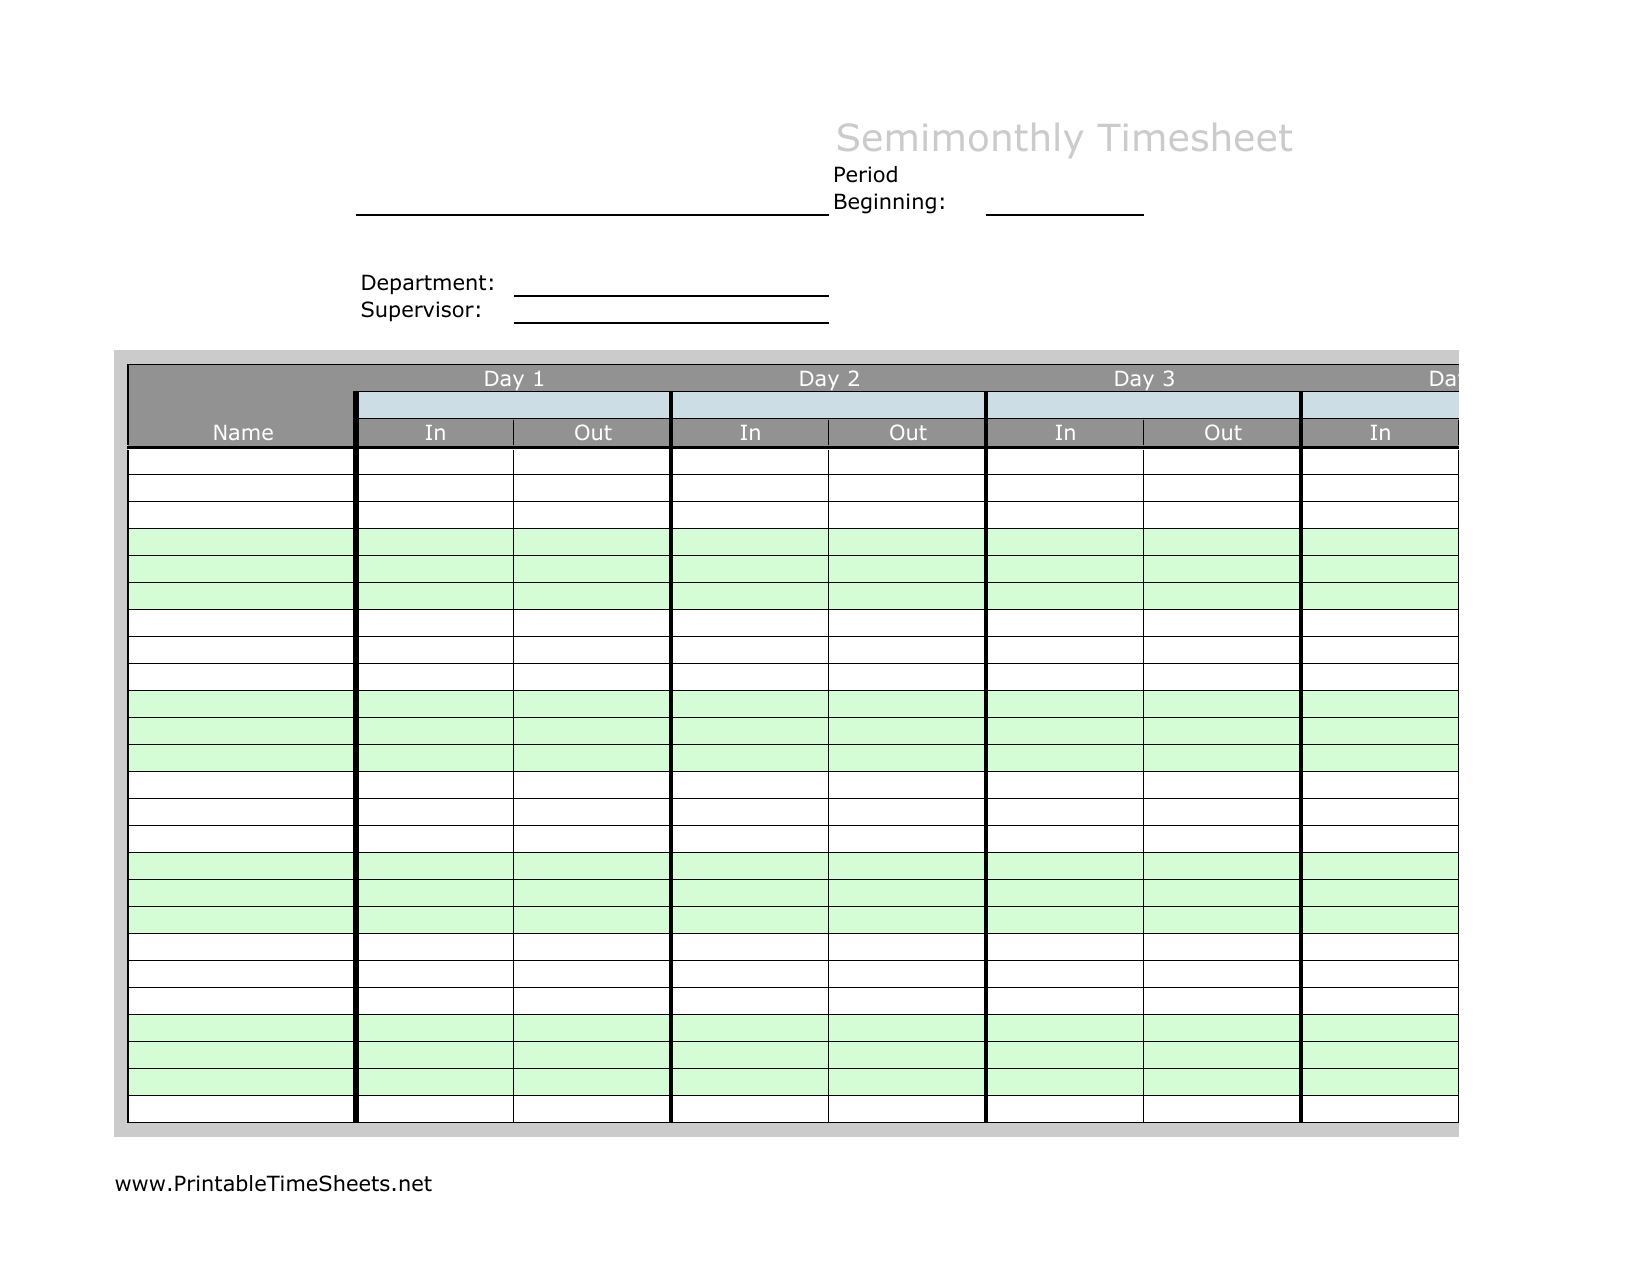 Semi Monthly Timesheet Template from freedownloads.net